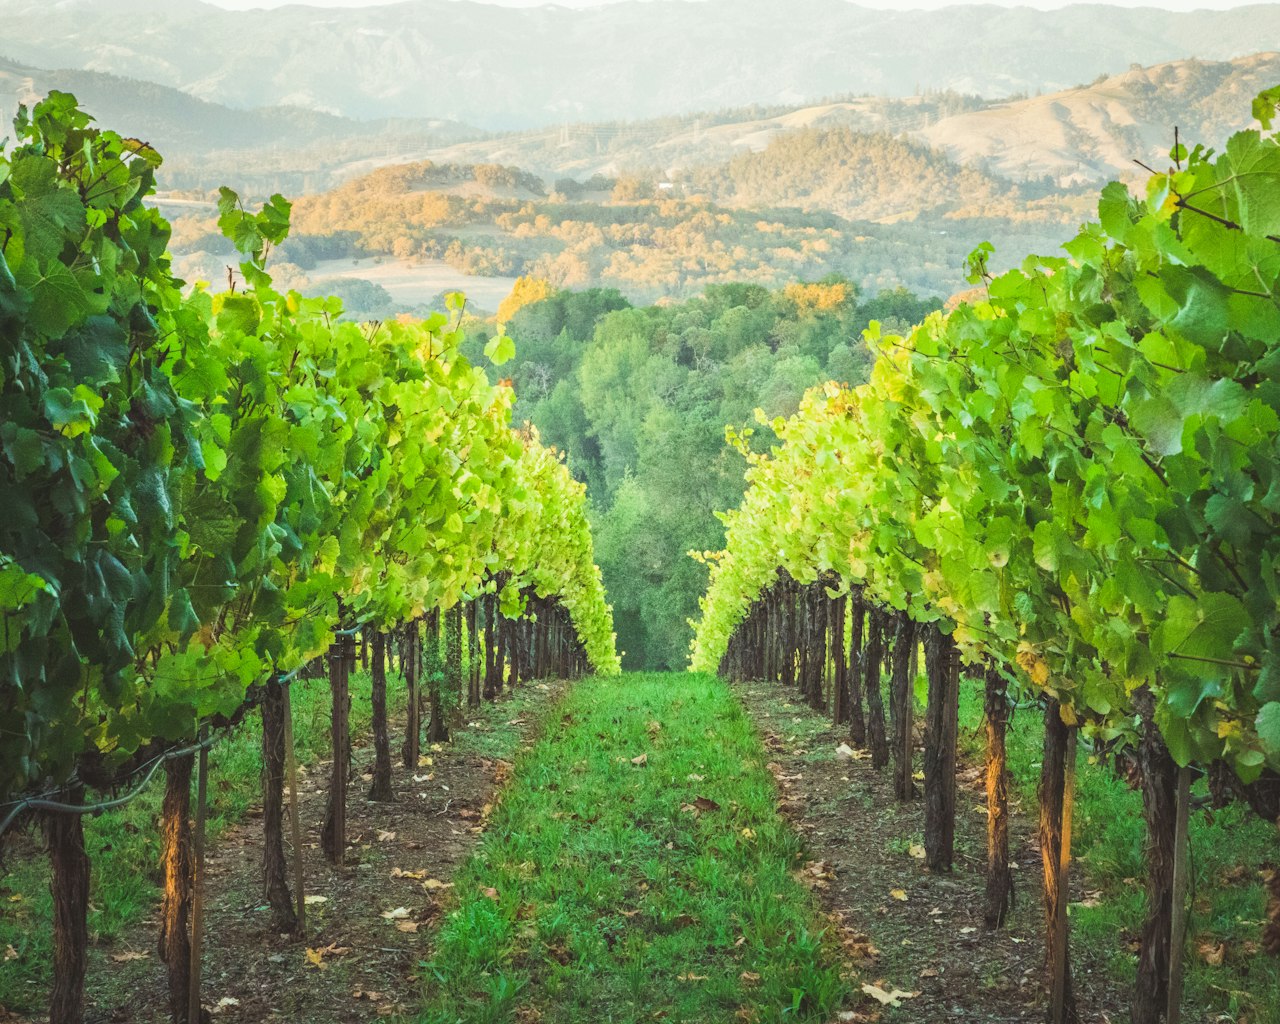 between rows of grapevines in california wine country, set on a hill with green grass and trees in the background